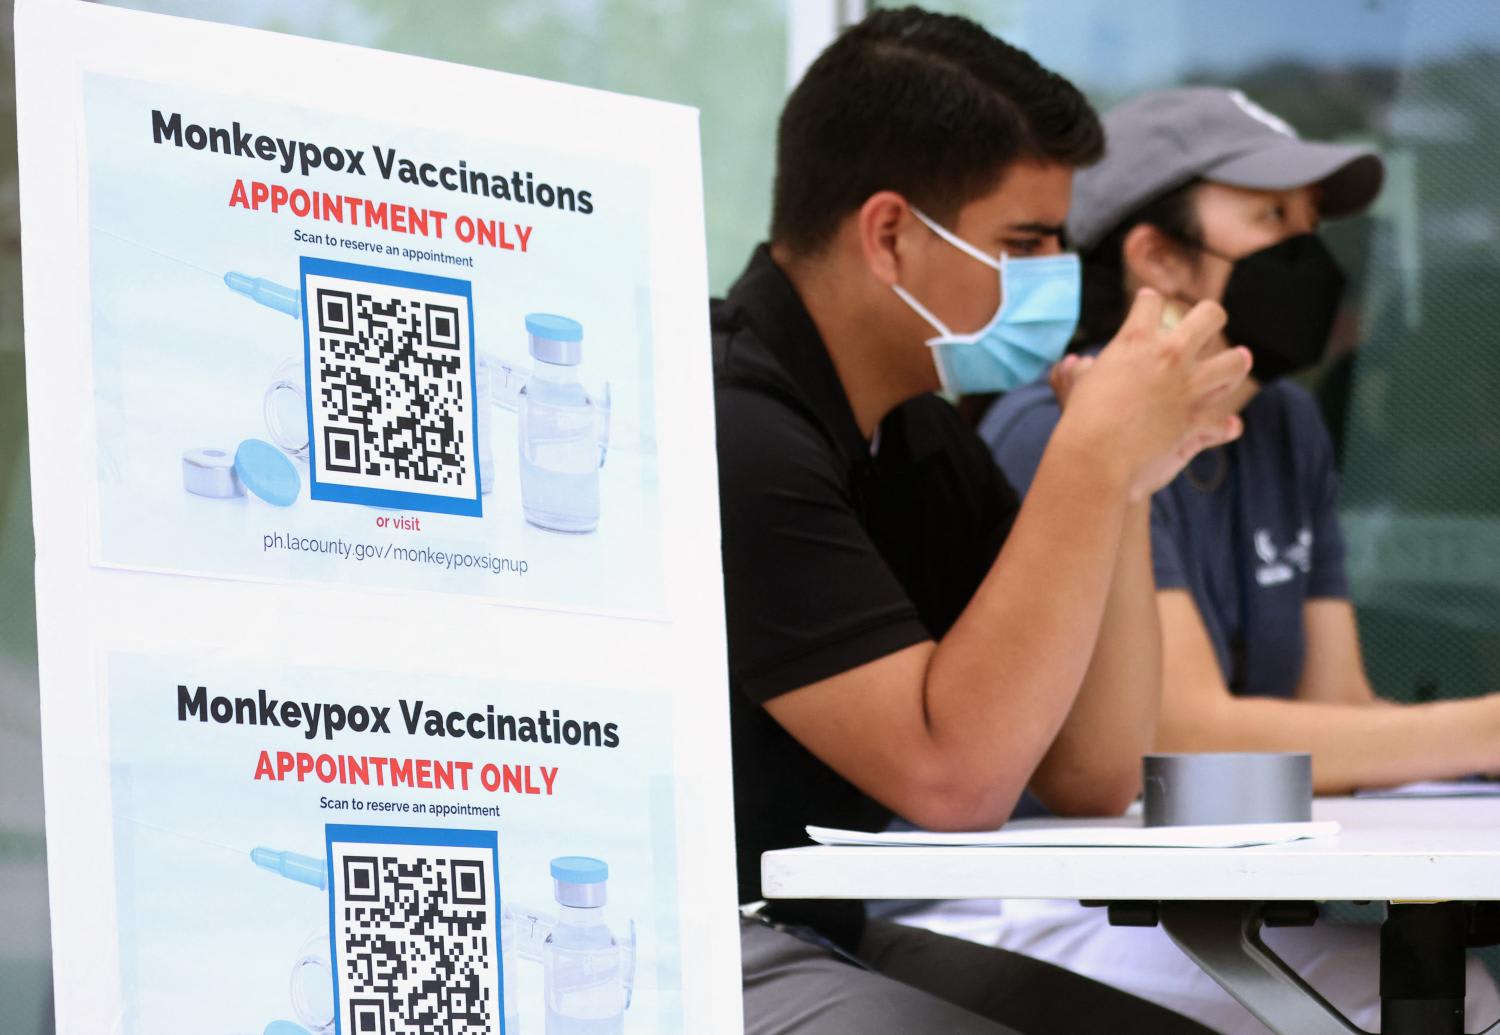 Health workers sit at a table at a pop-up monkeypox vaccination clinic at the West Hollywood Library on Aug 3, 2022 in West Hollywood, California.